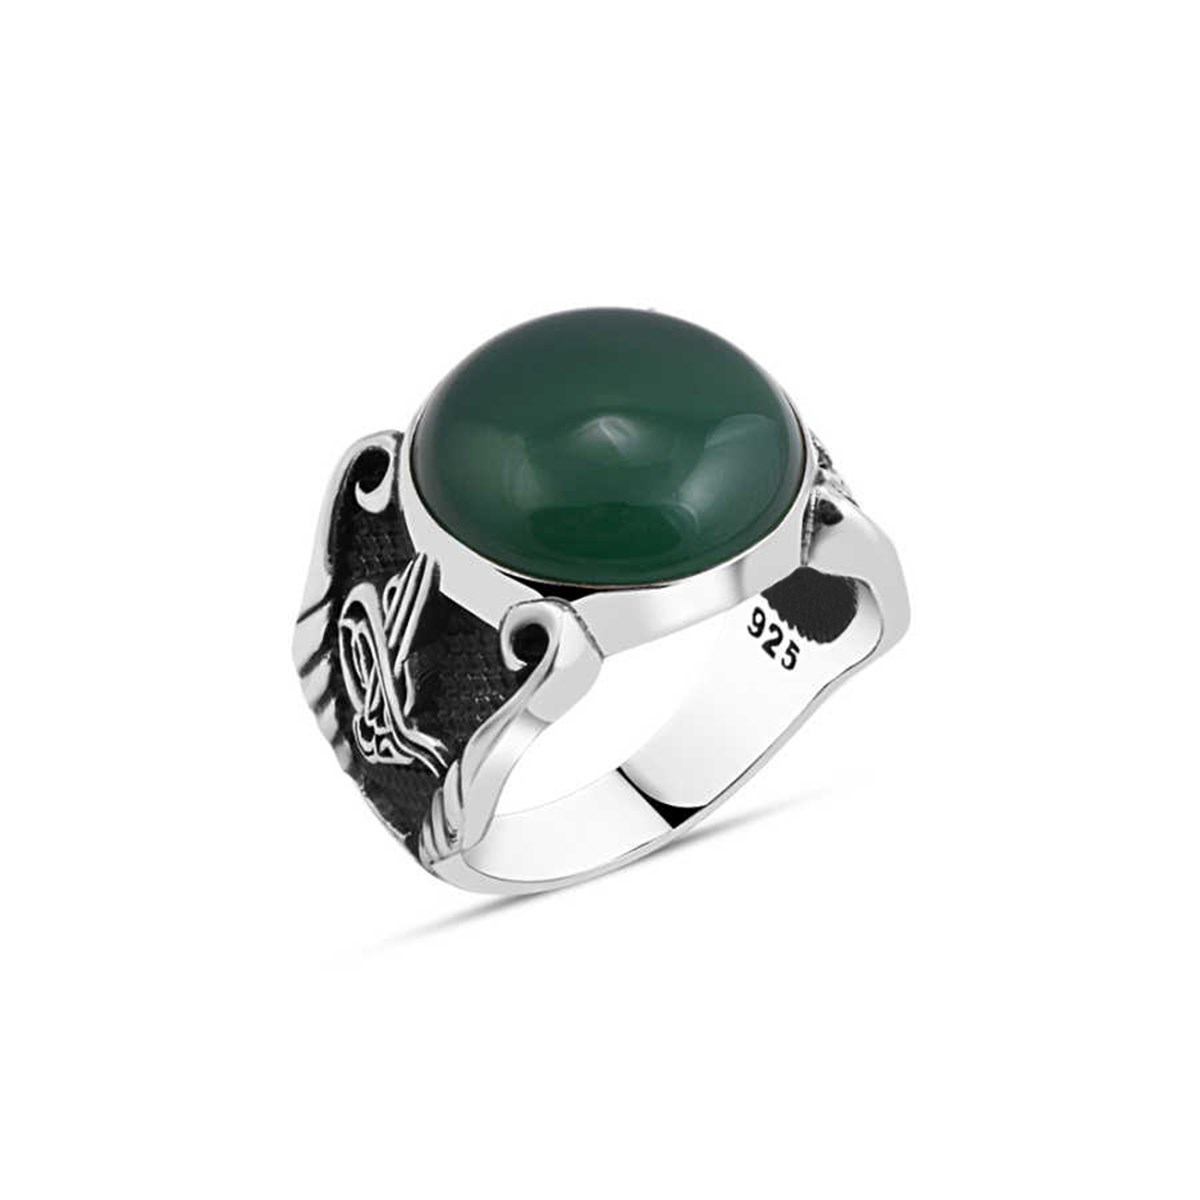 Hooded Green Agate Stone Sterling Silver Men's Ring